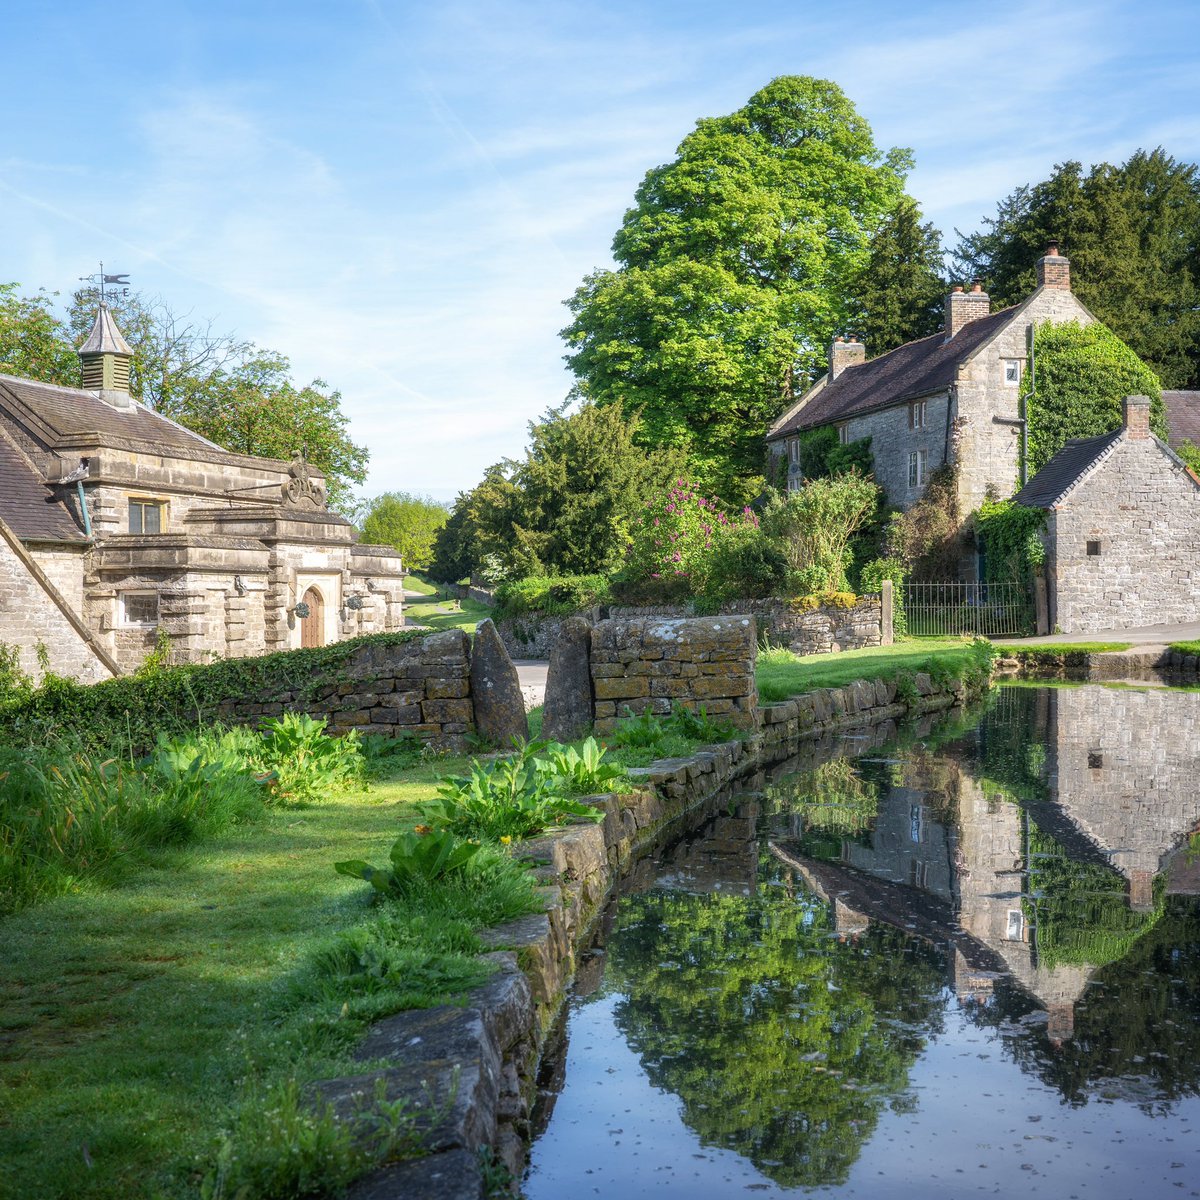 If you've never been to the wonderful #peakdistrict village of Tissington, now's the time to go! The annual Well Dressing Festival is currently in full swing, a tradition dating back to the 1300s, and the duck pond is looking pretty darned special too.